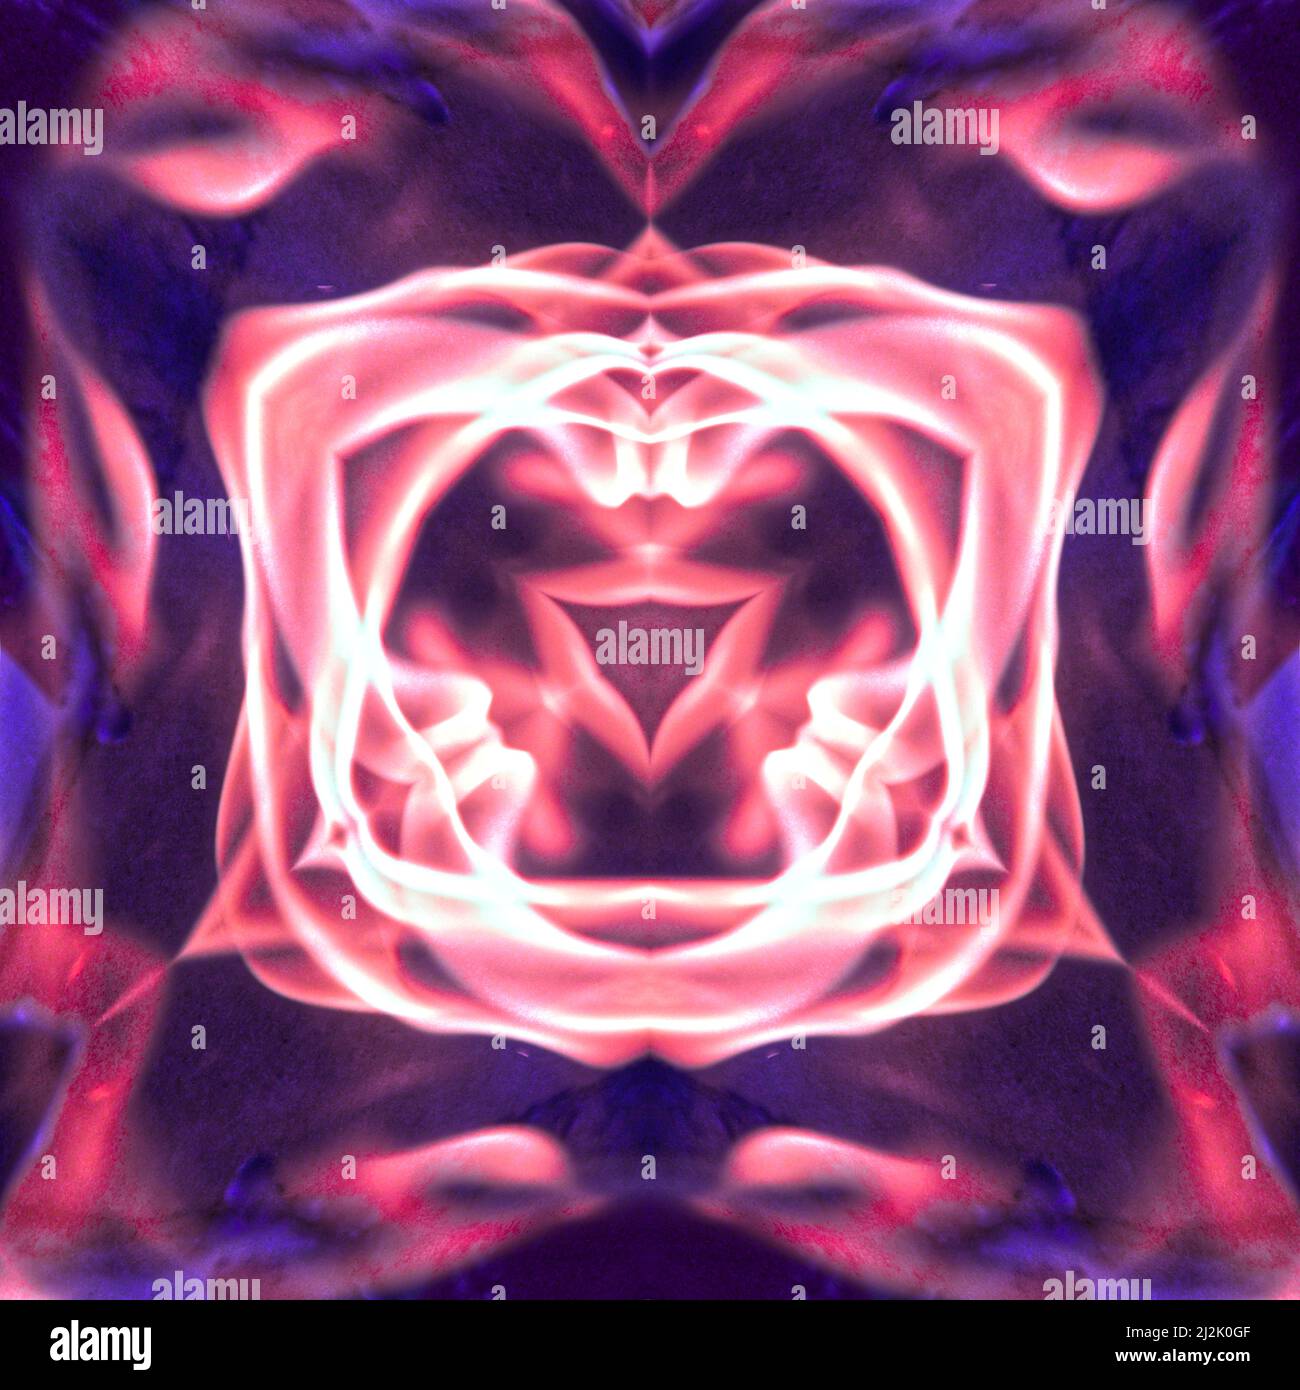 Pink and purple fractal mirror abstract of burning flames Stock Photo